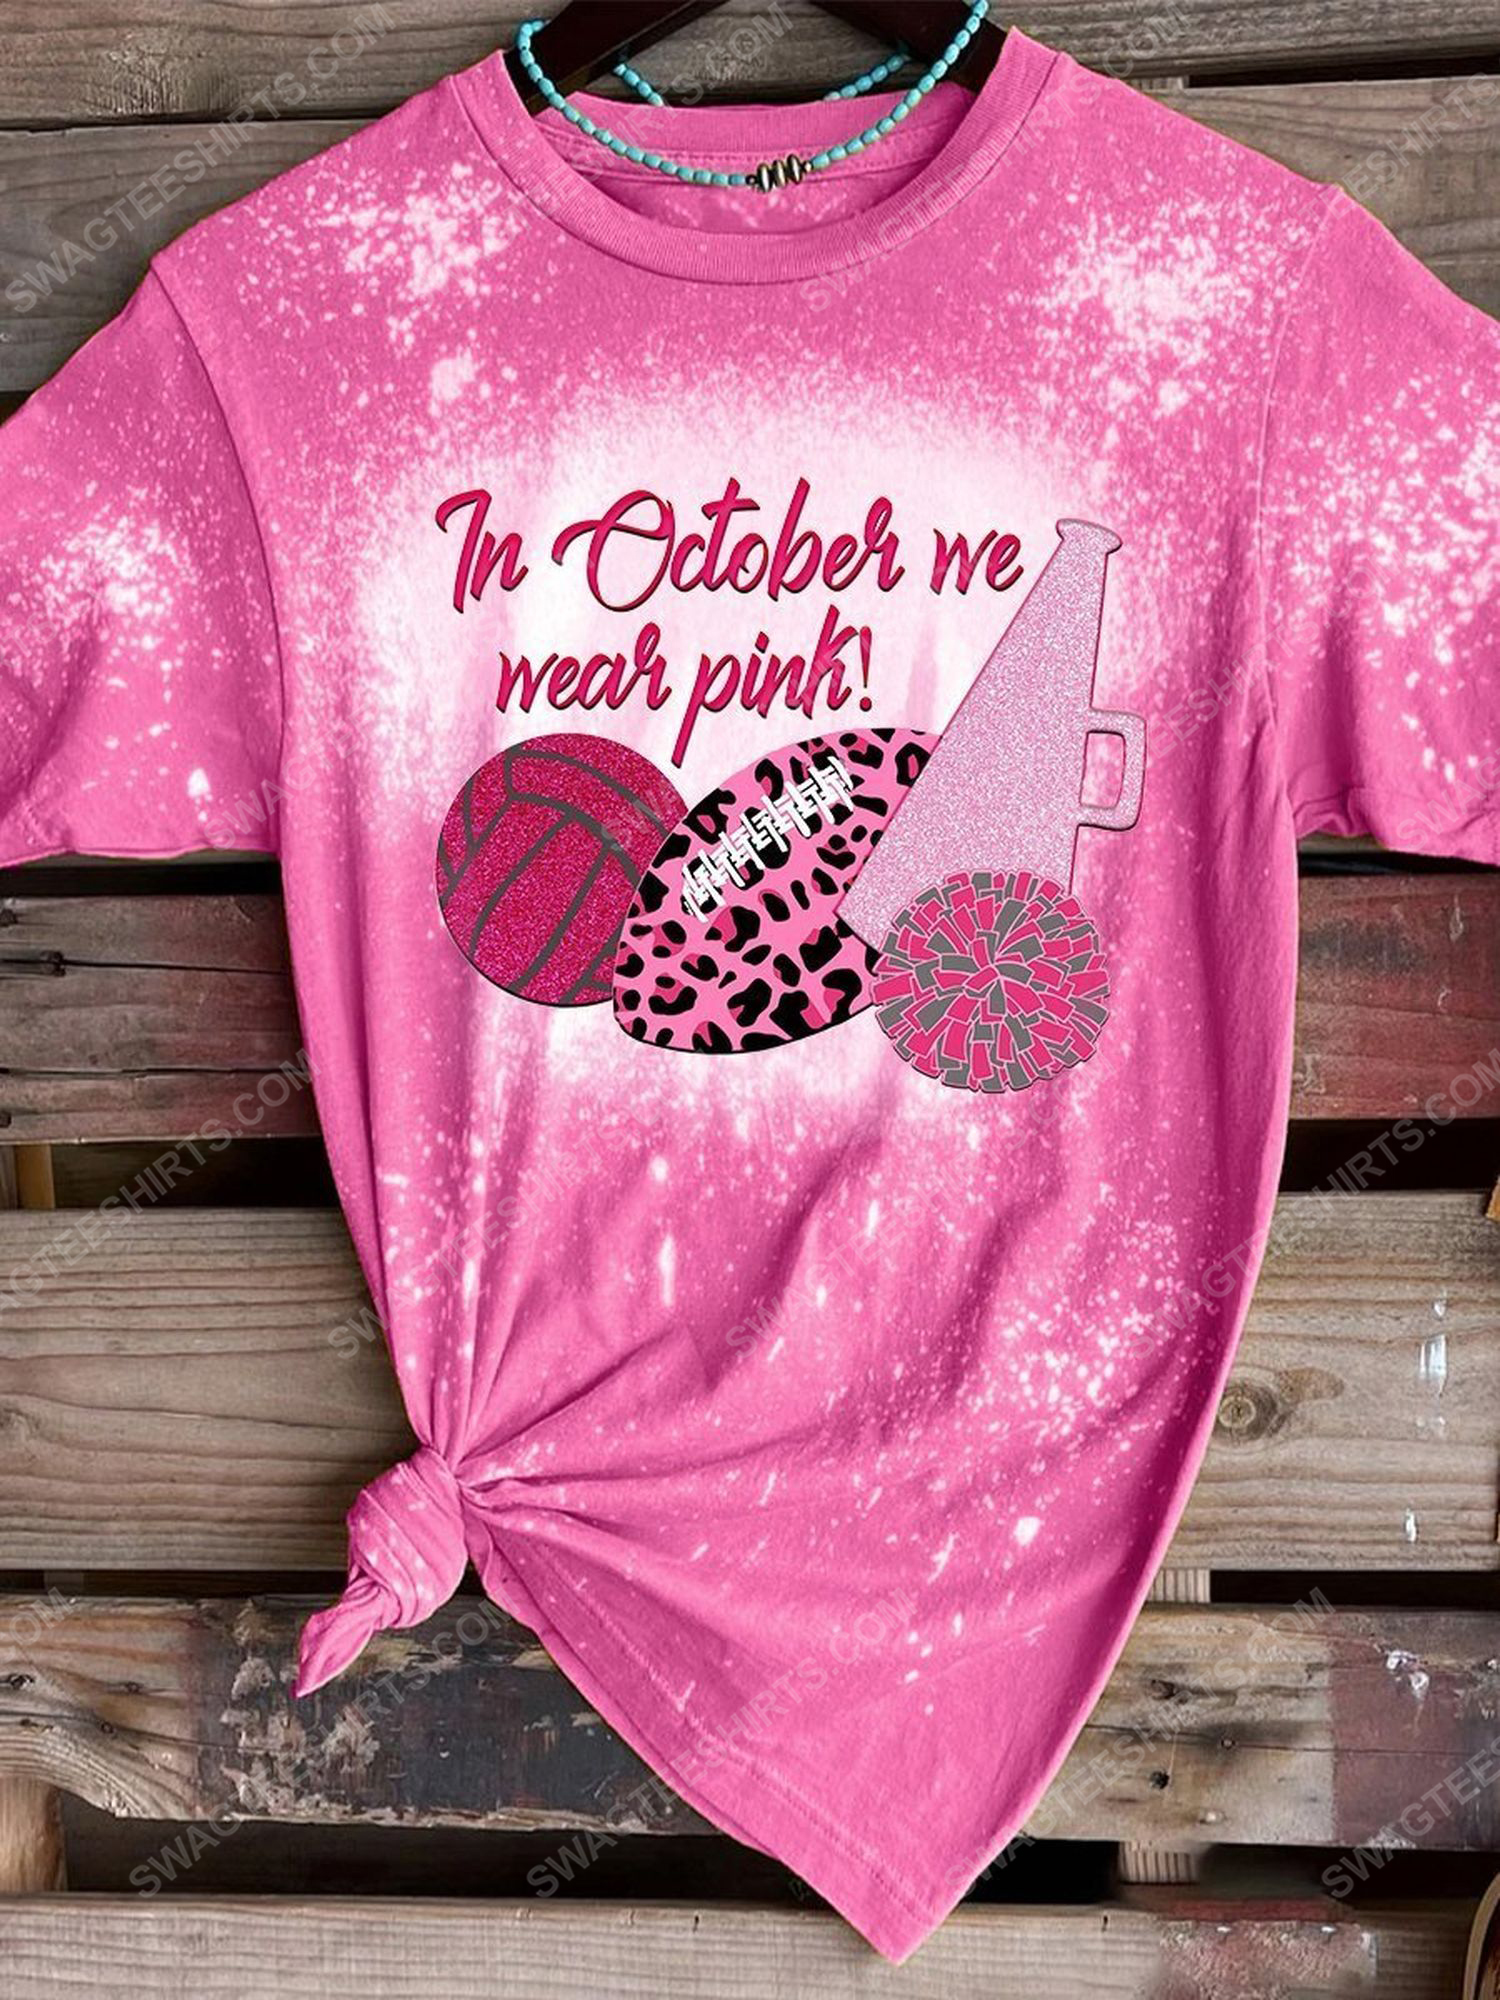 Breast cancer awareness in october we wear pink sports ​bleached shirt